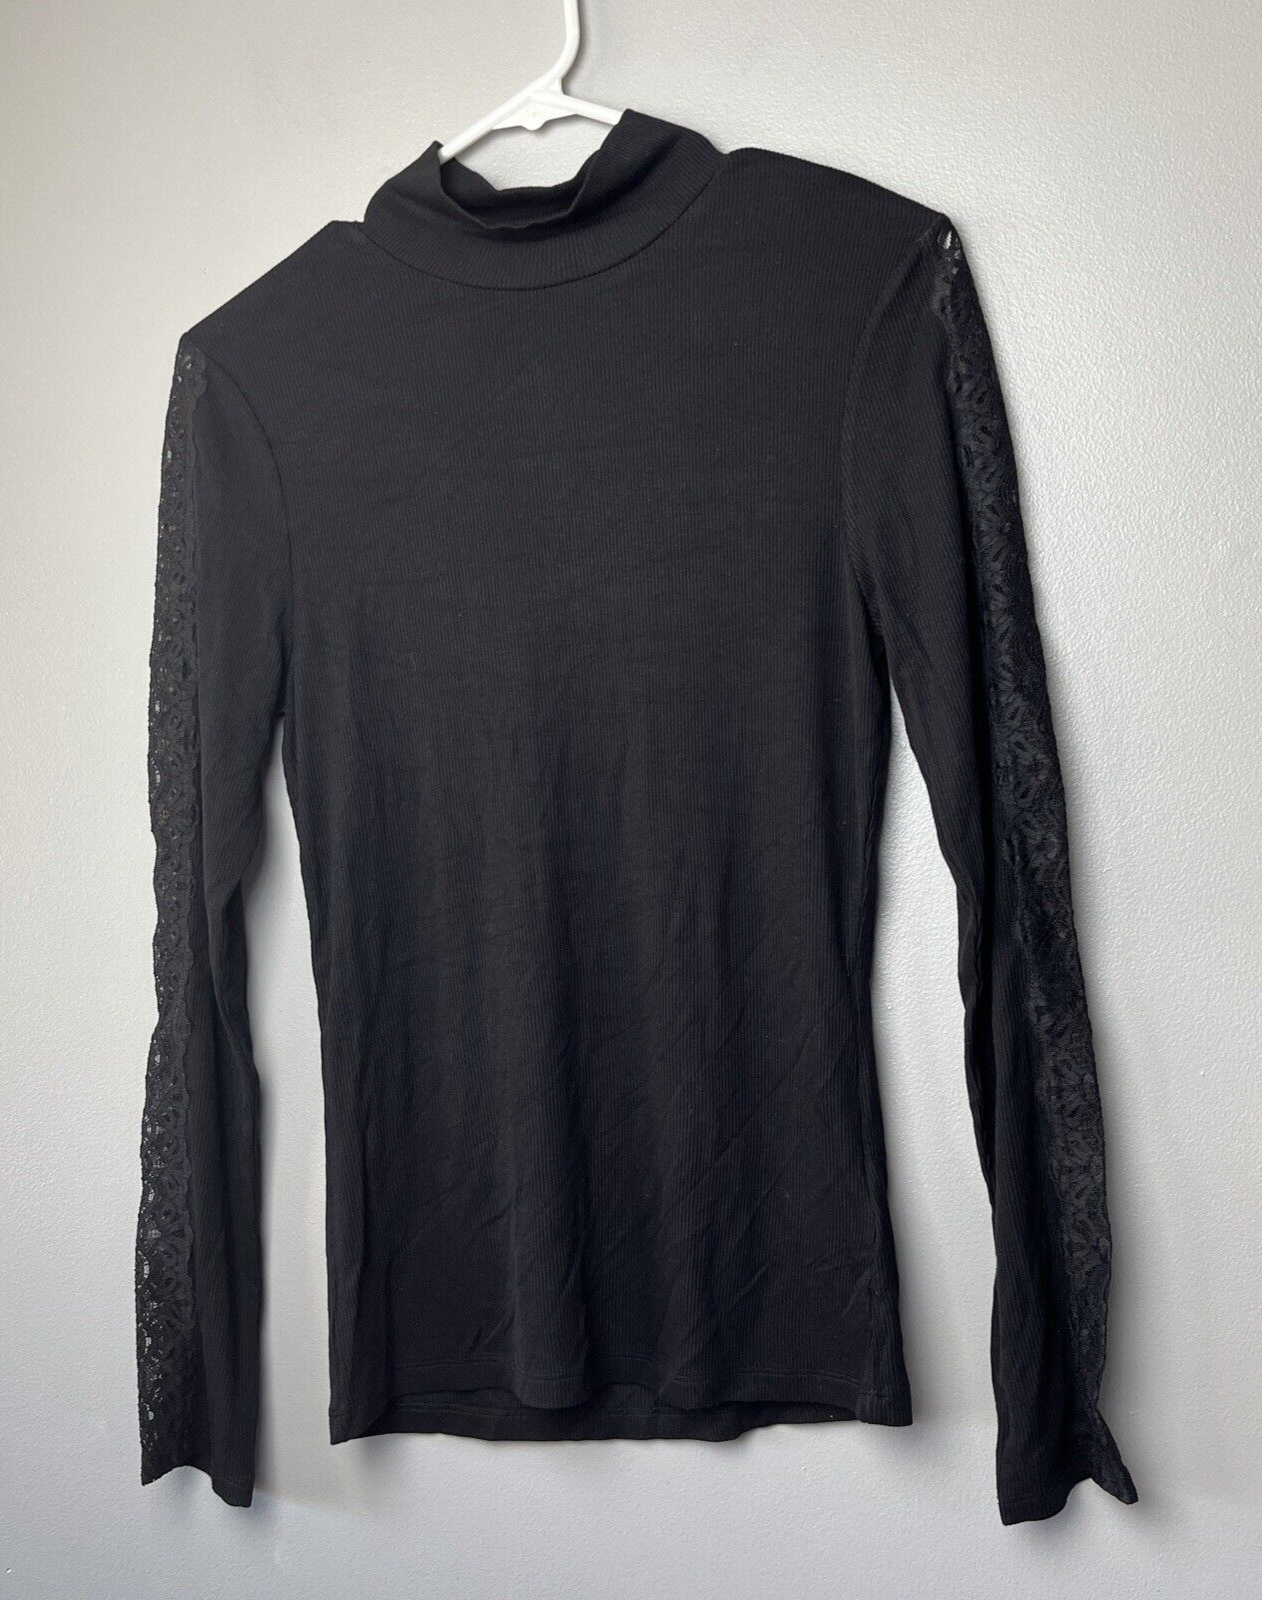 Paige Lace Sleeve Mock Neck Black Top Size Small